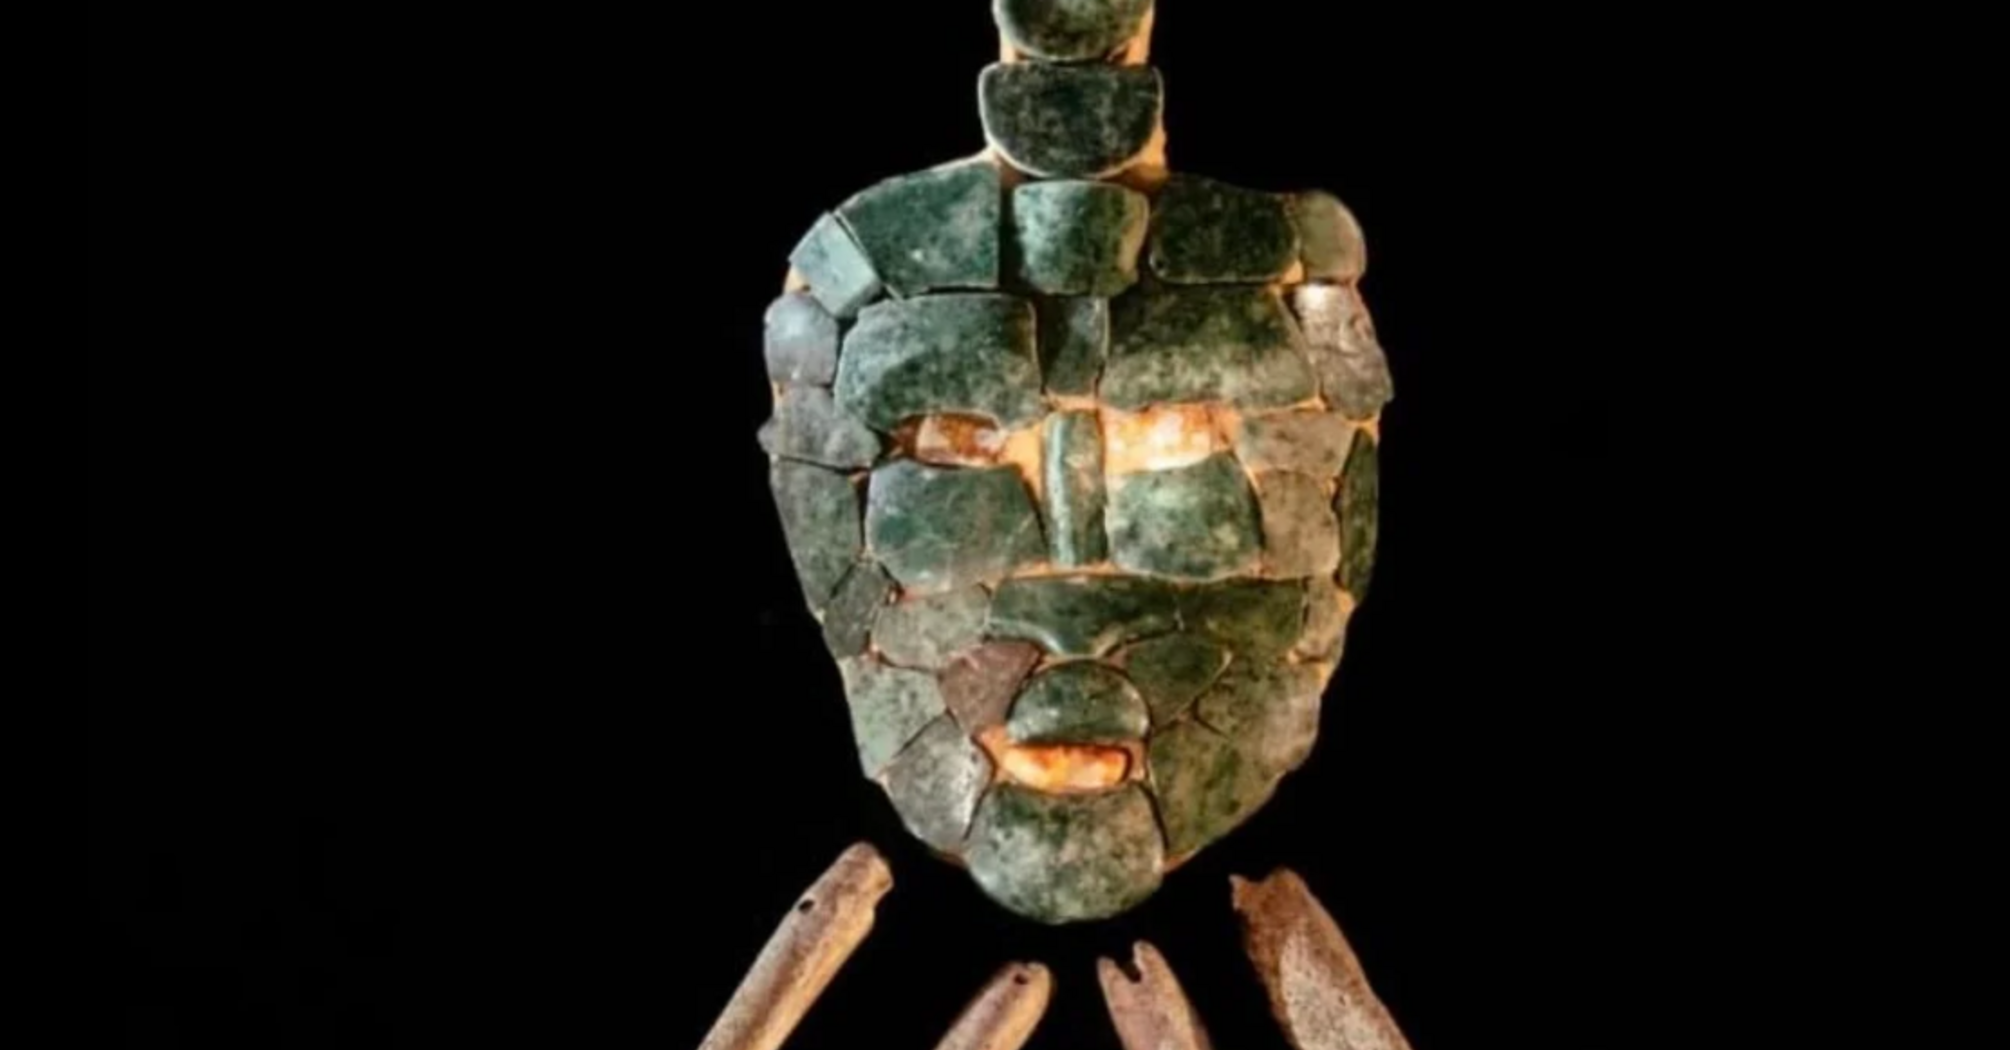 Scientists find jade mask of storm god from 200 AD in Mexico